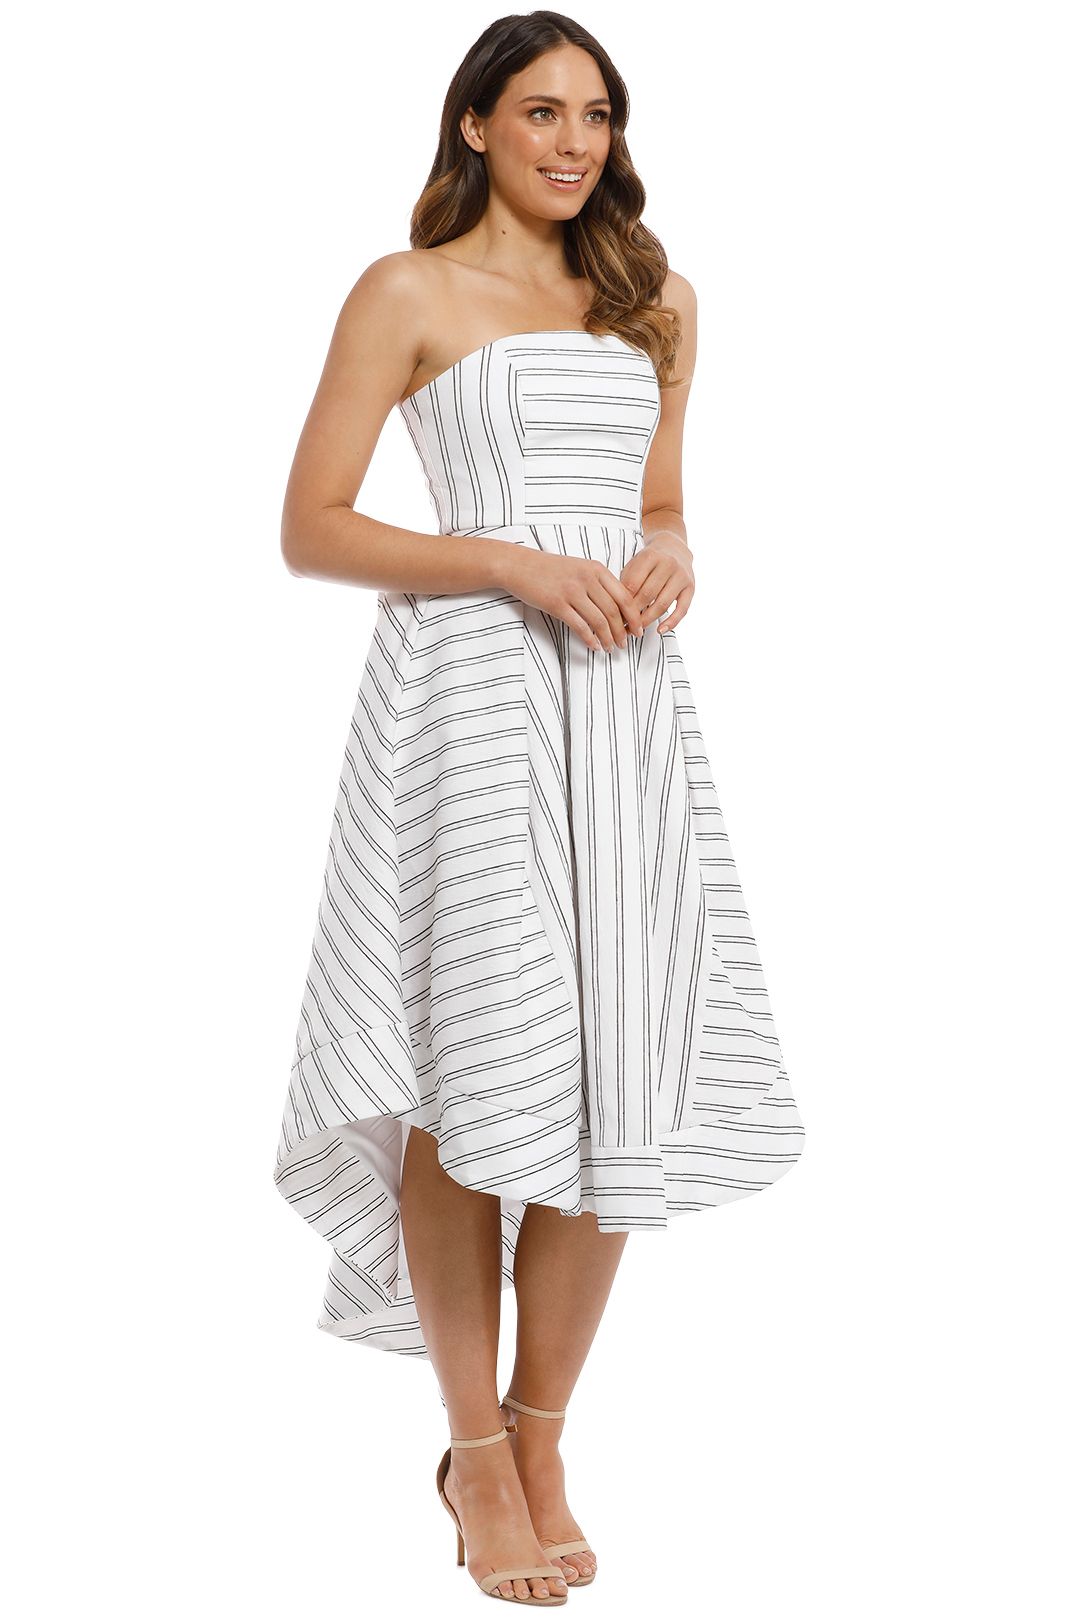 CMEO Collective - Moments Apart Gown - Ivory Stripe - 